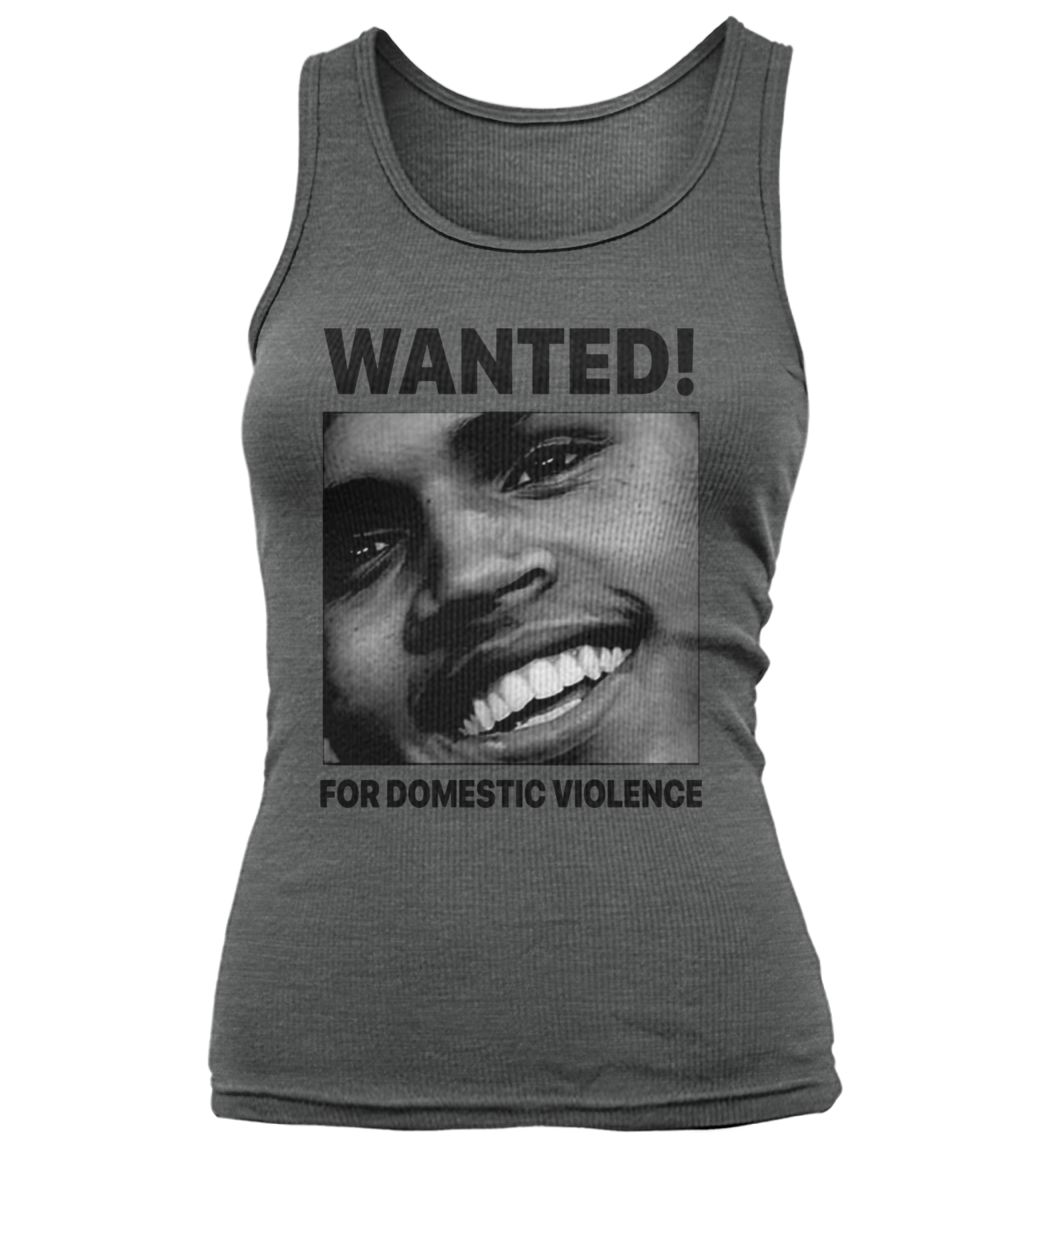 Frank ocean chris brown wanted for domestic violence women's tank top